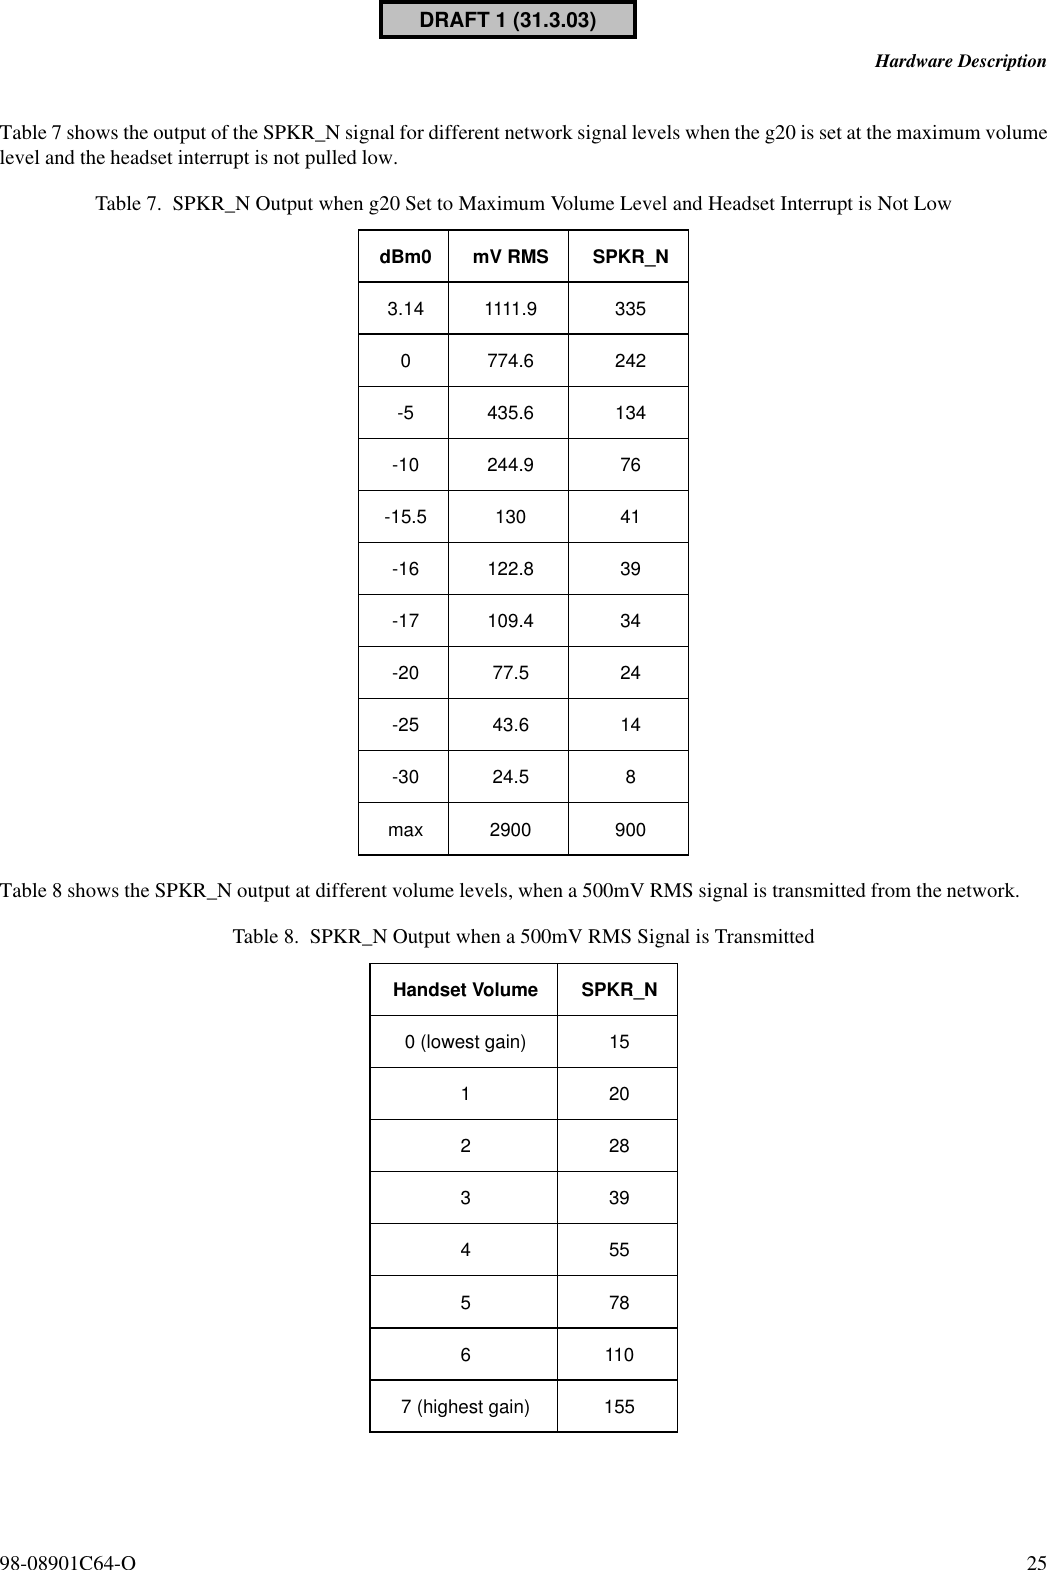 98-08901C64-O 25Hardware DescriptionTable 7 shows the output of the SPKR_N signal for different network signal levels when the g20 is set at the maximum volumelevel and the headset interrupt is not pulled low.Table 8 shows the SPKR_N output at different volume levels, when a 500mV RMS signal is transmitted from the network.Table 7. SPKR_N Output when g20 Set to Maximum Volume Level and Headset Interrupt is Not LowdBm0 mV RMS SPKR_N3.14 1111.9 3350 774.6 242-5 435.6 134-10 244.9 76-15.5 130 41-16 122.8 39-17 109.4 34-20 77.5 24-25 43.6 14-30 24.5 8max 2900 900Table 8. SPKR_N Output when a 500mV RMS Signal is TransmittedHandset Volume SPKR_N0 (lowest gain) 1512022833945557861107 (highest gain) 155DRAFT 1 (31.3.03)